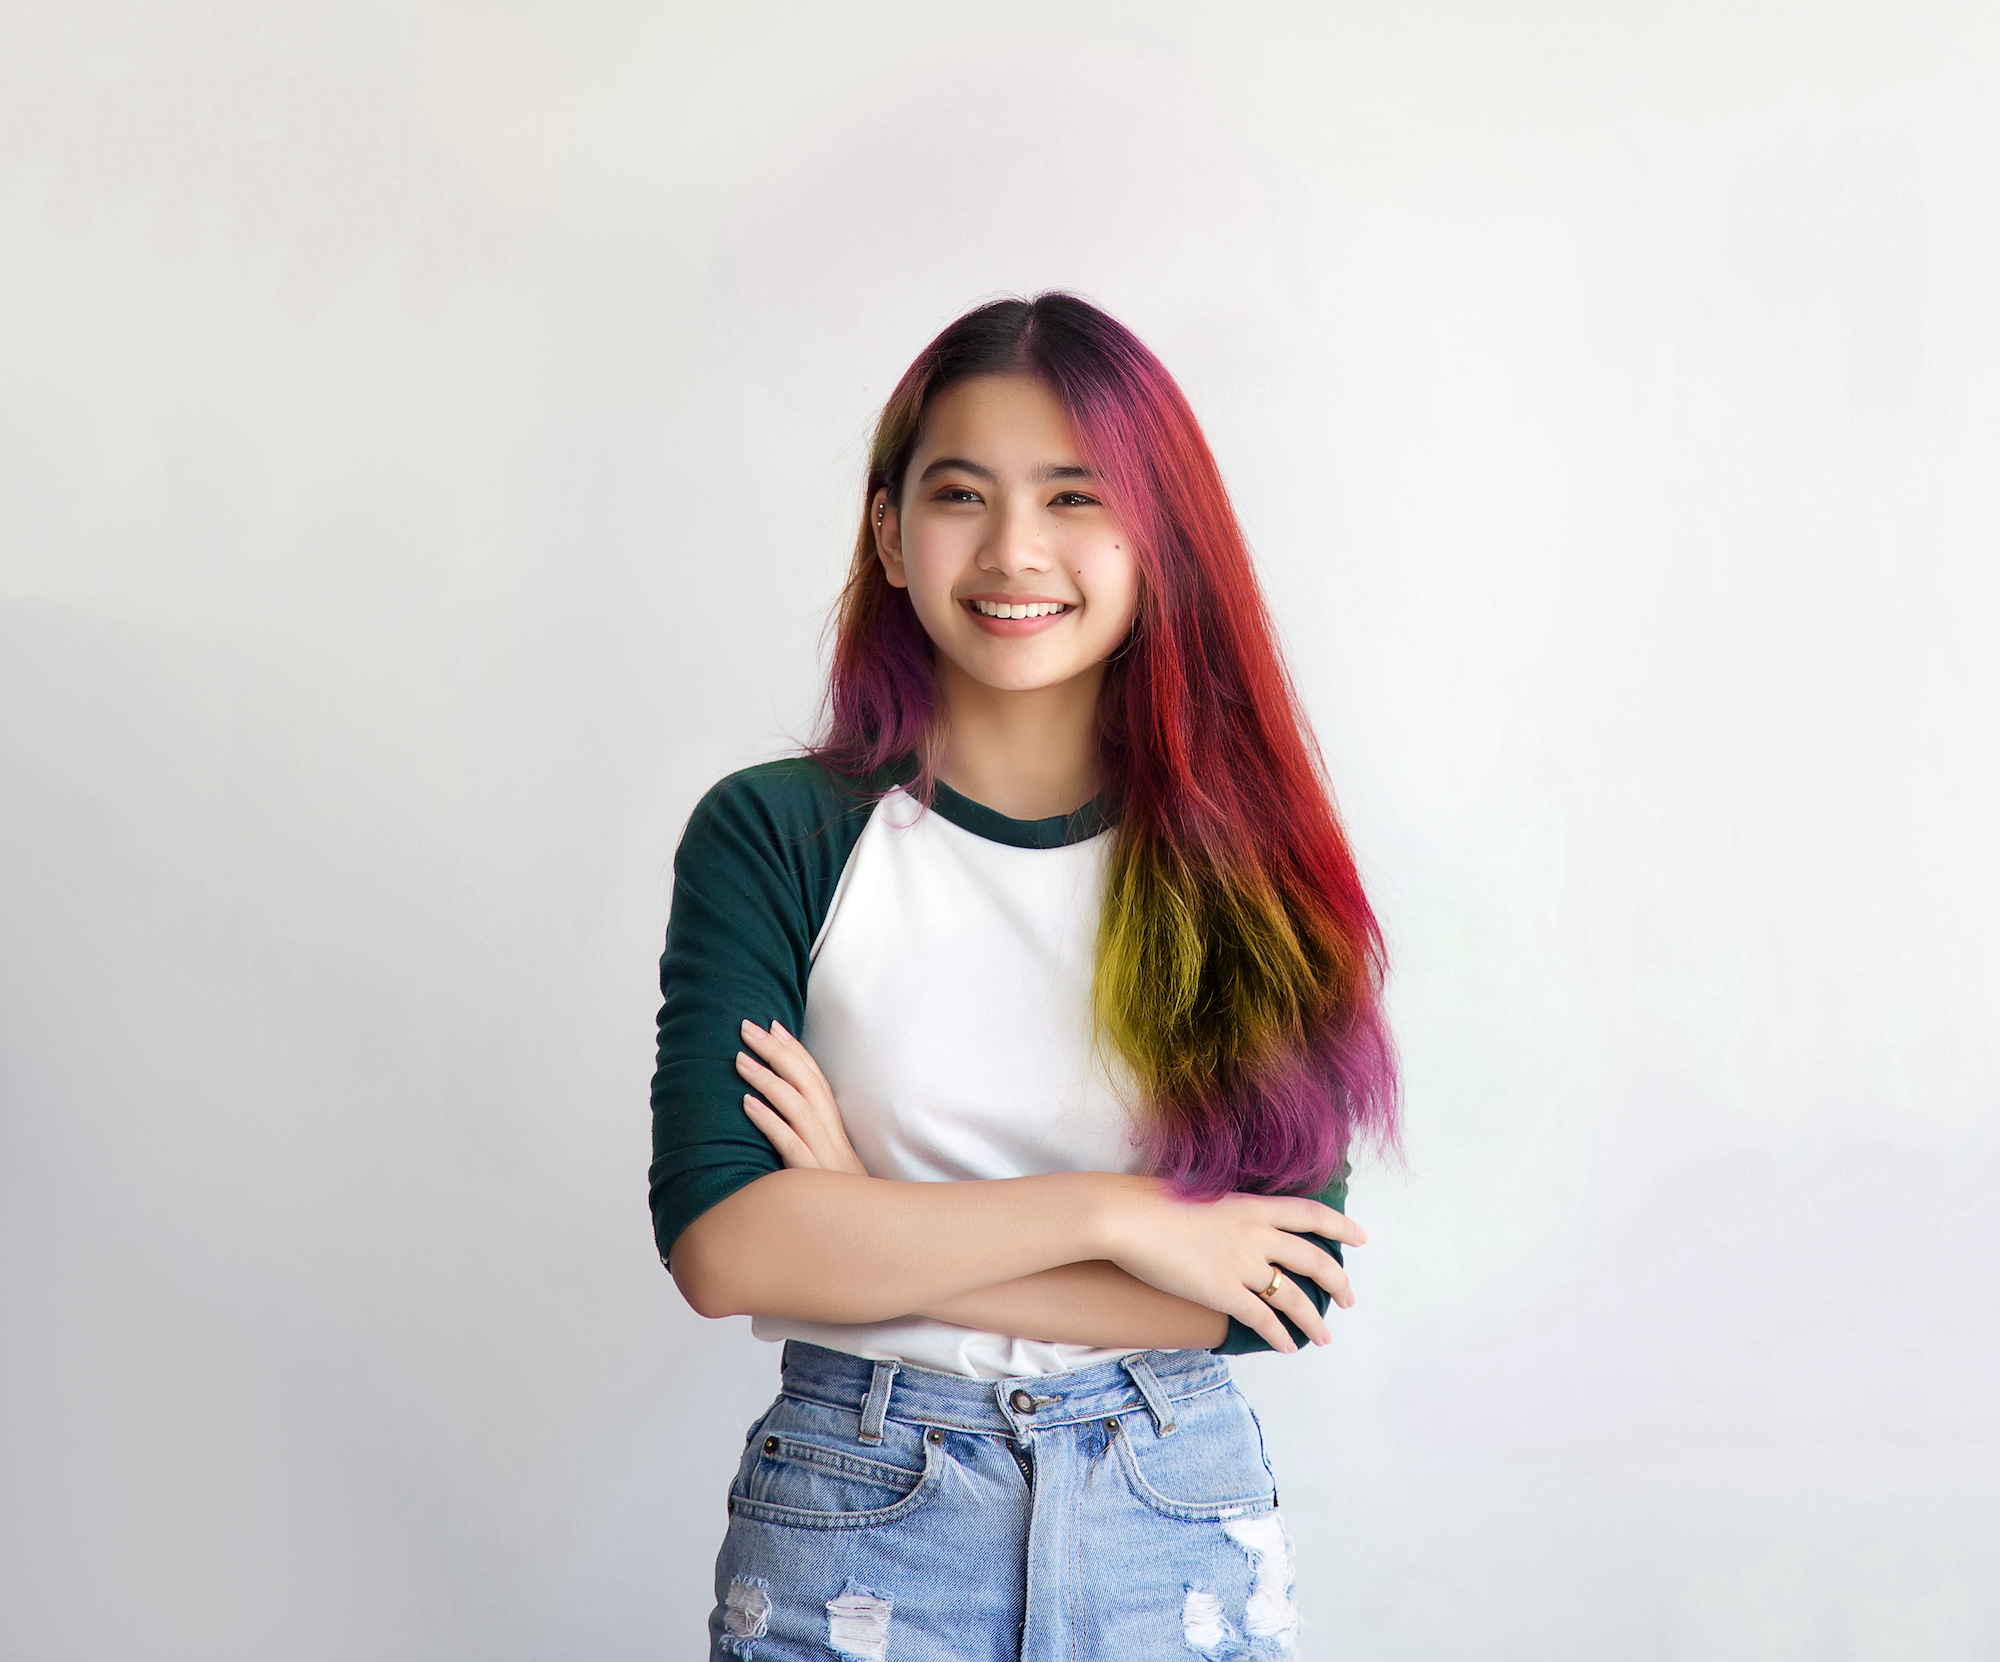 pretty asian femele smiling joyfully with colorful hair in dressed casually like hipster lifestyle, Independent fashion concept.